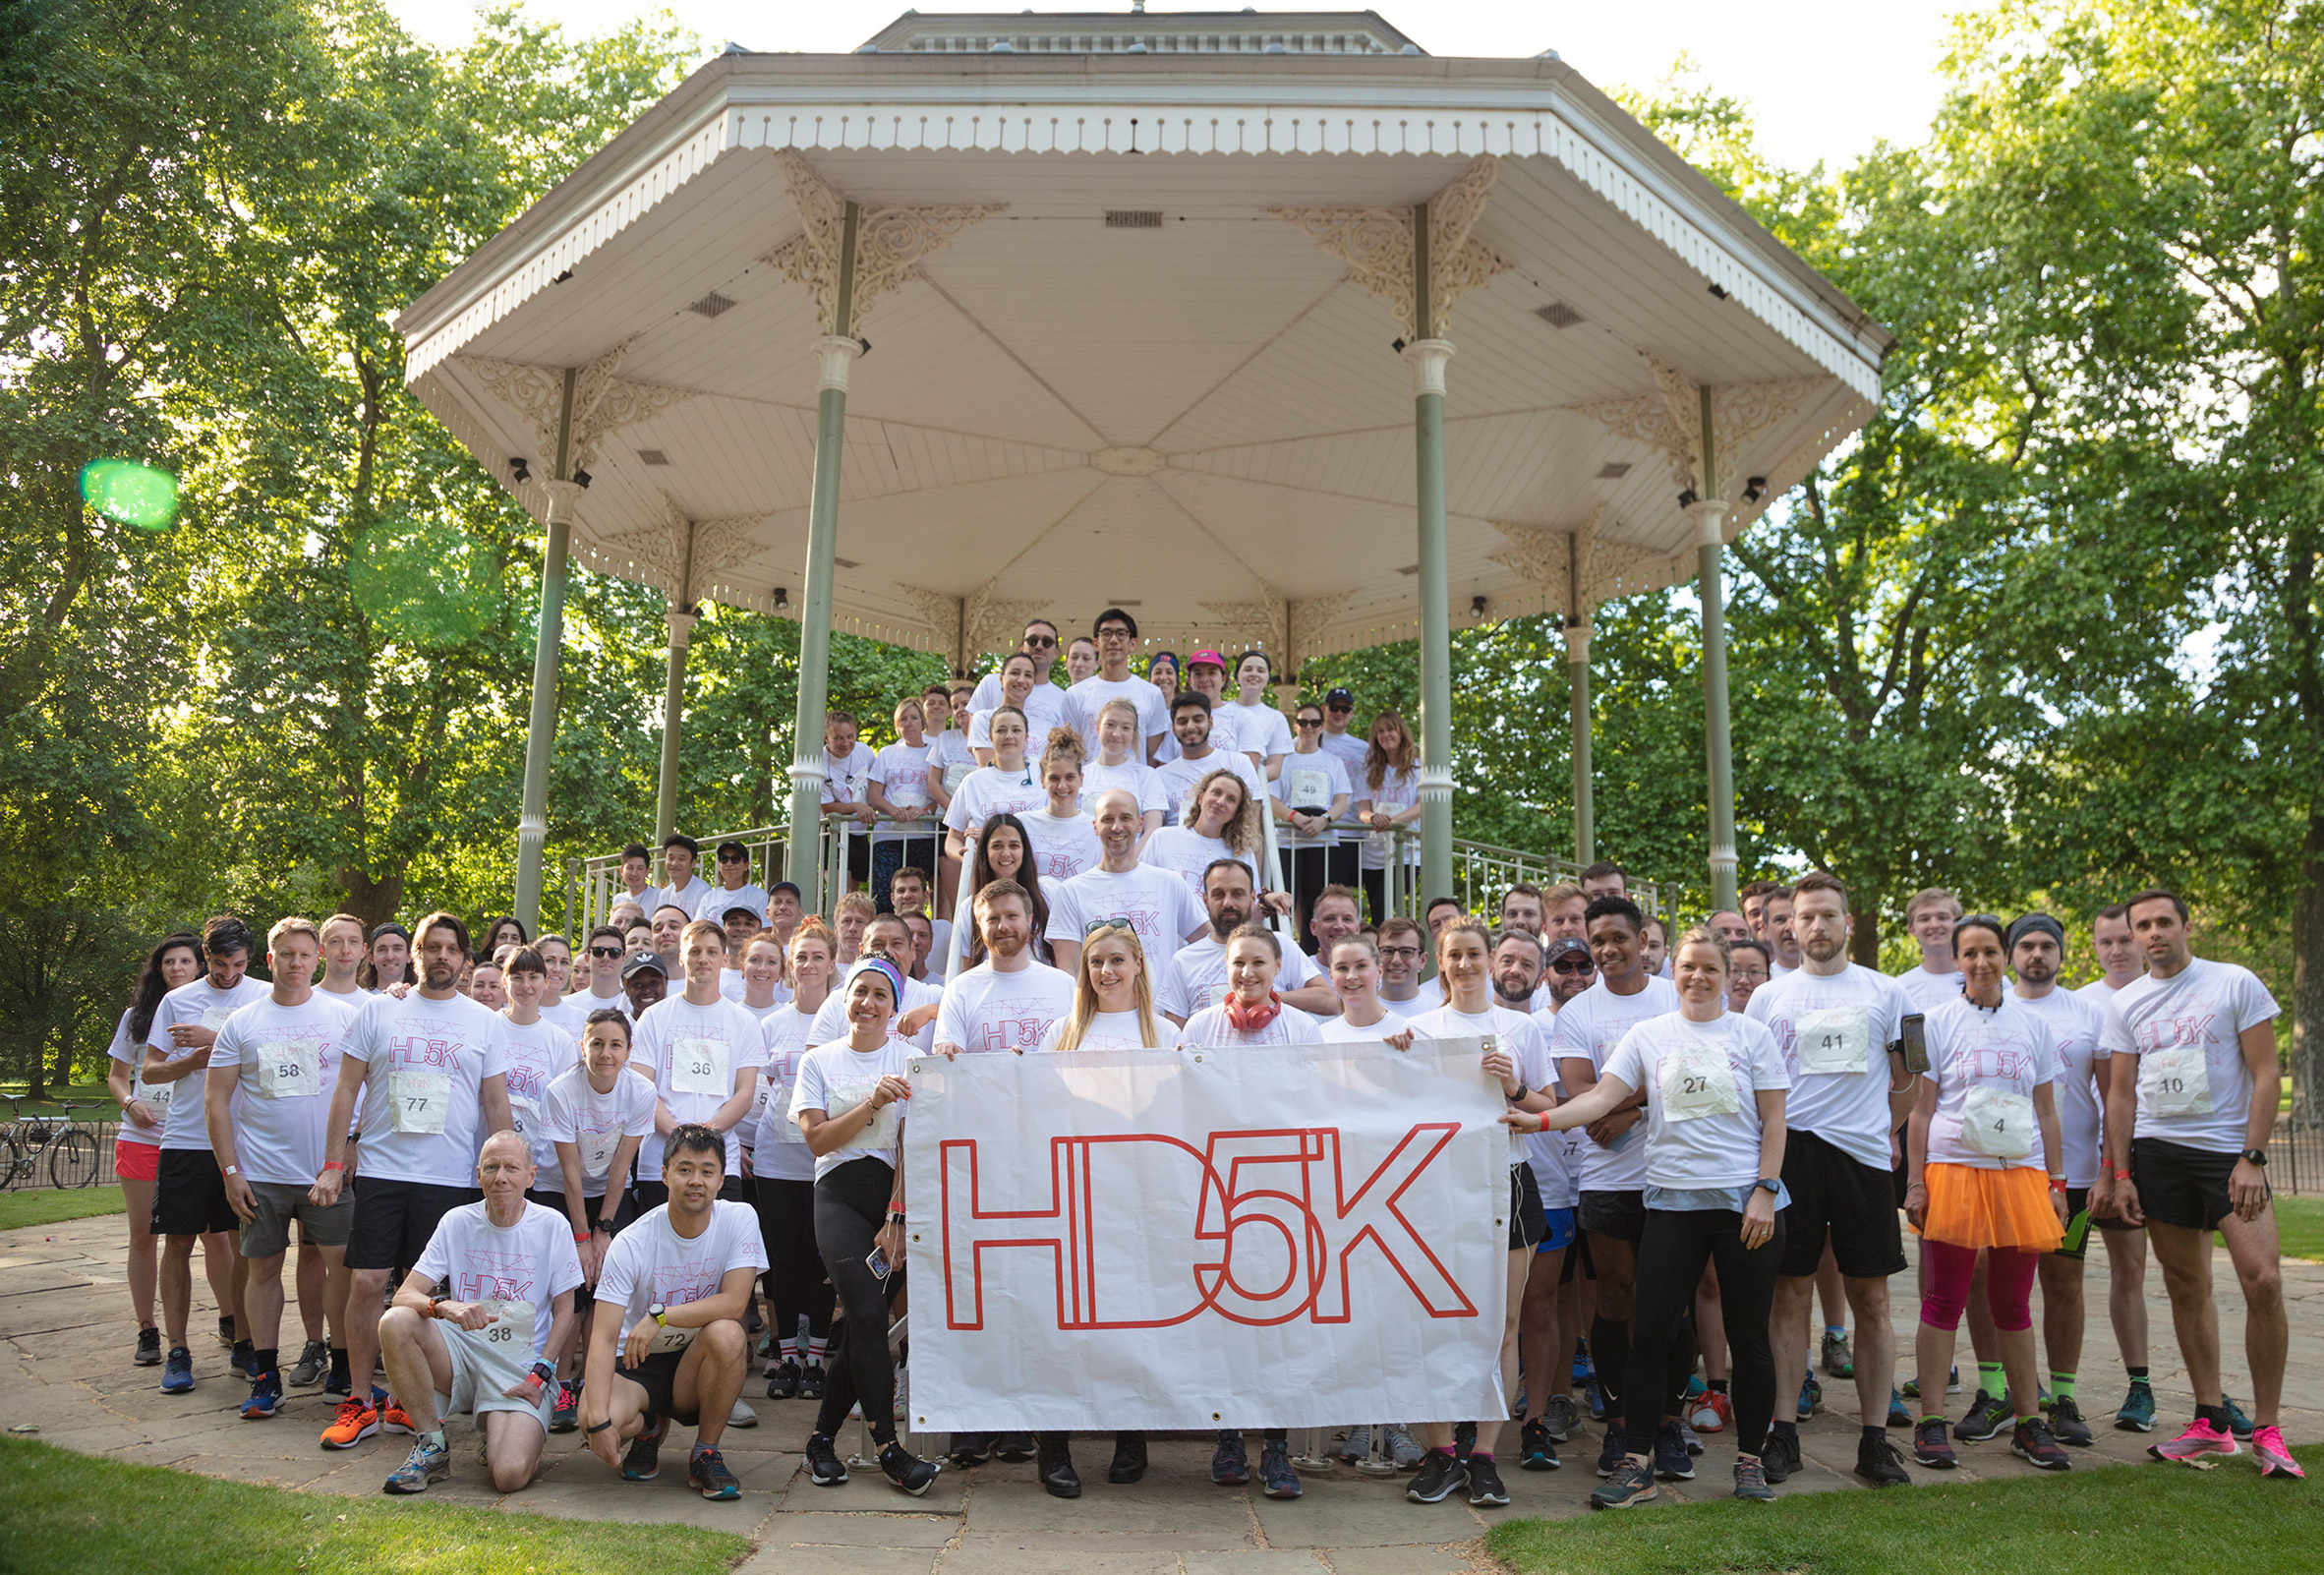 HD5K runners gathered at a band stand with a banner